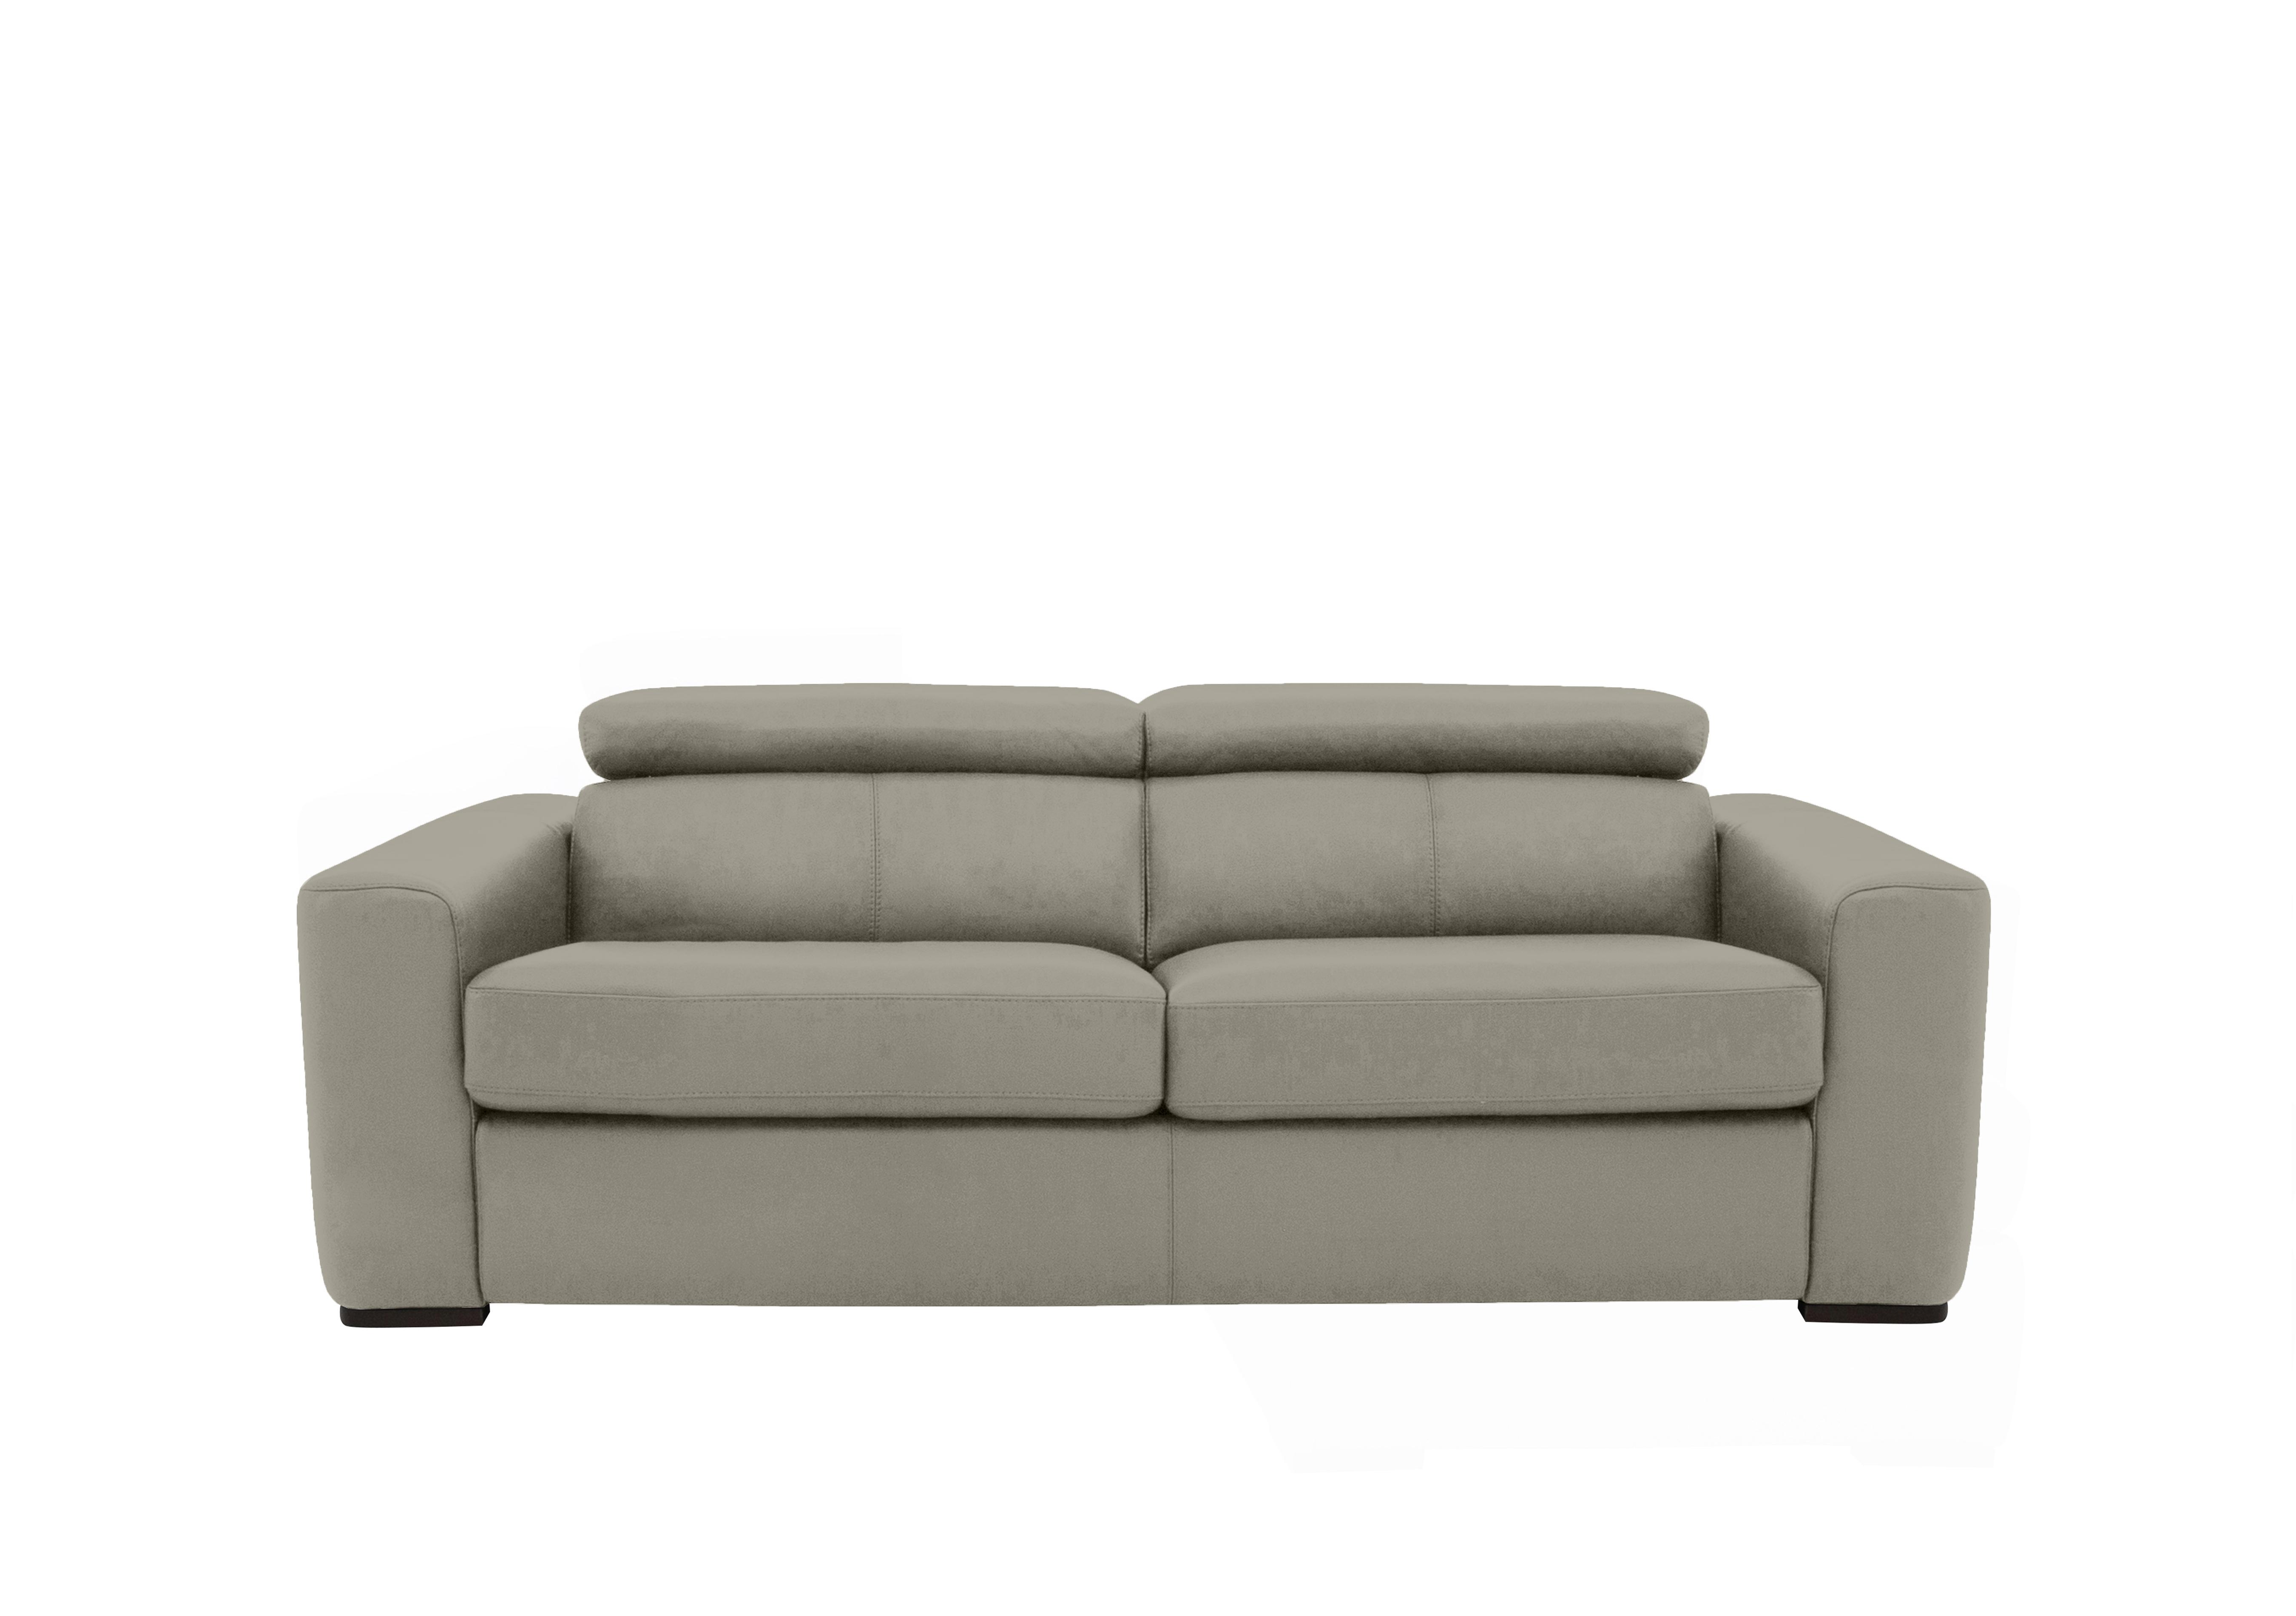 Infinity 3 Seater Leather Sofa in Bv-946b Silver Grey on Furniture Village